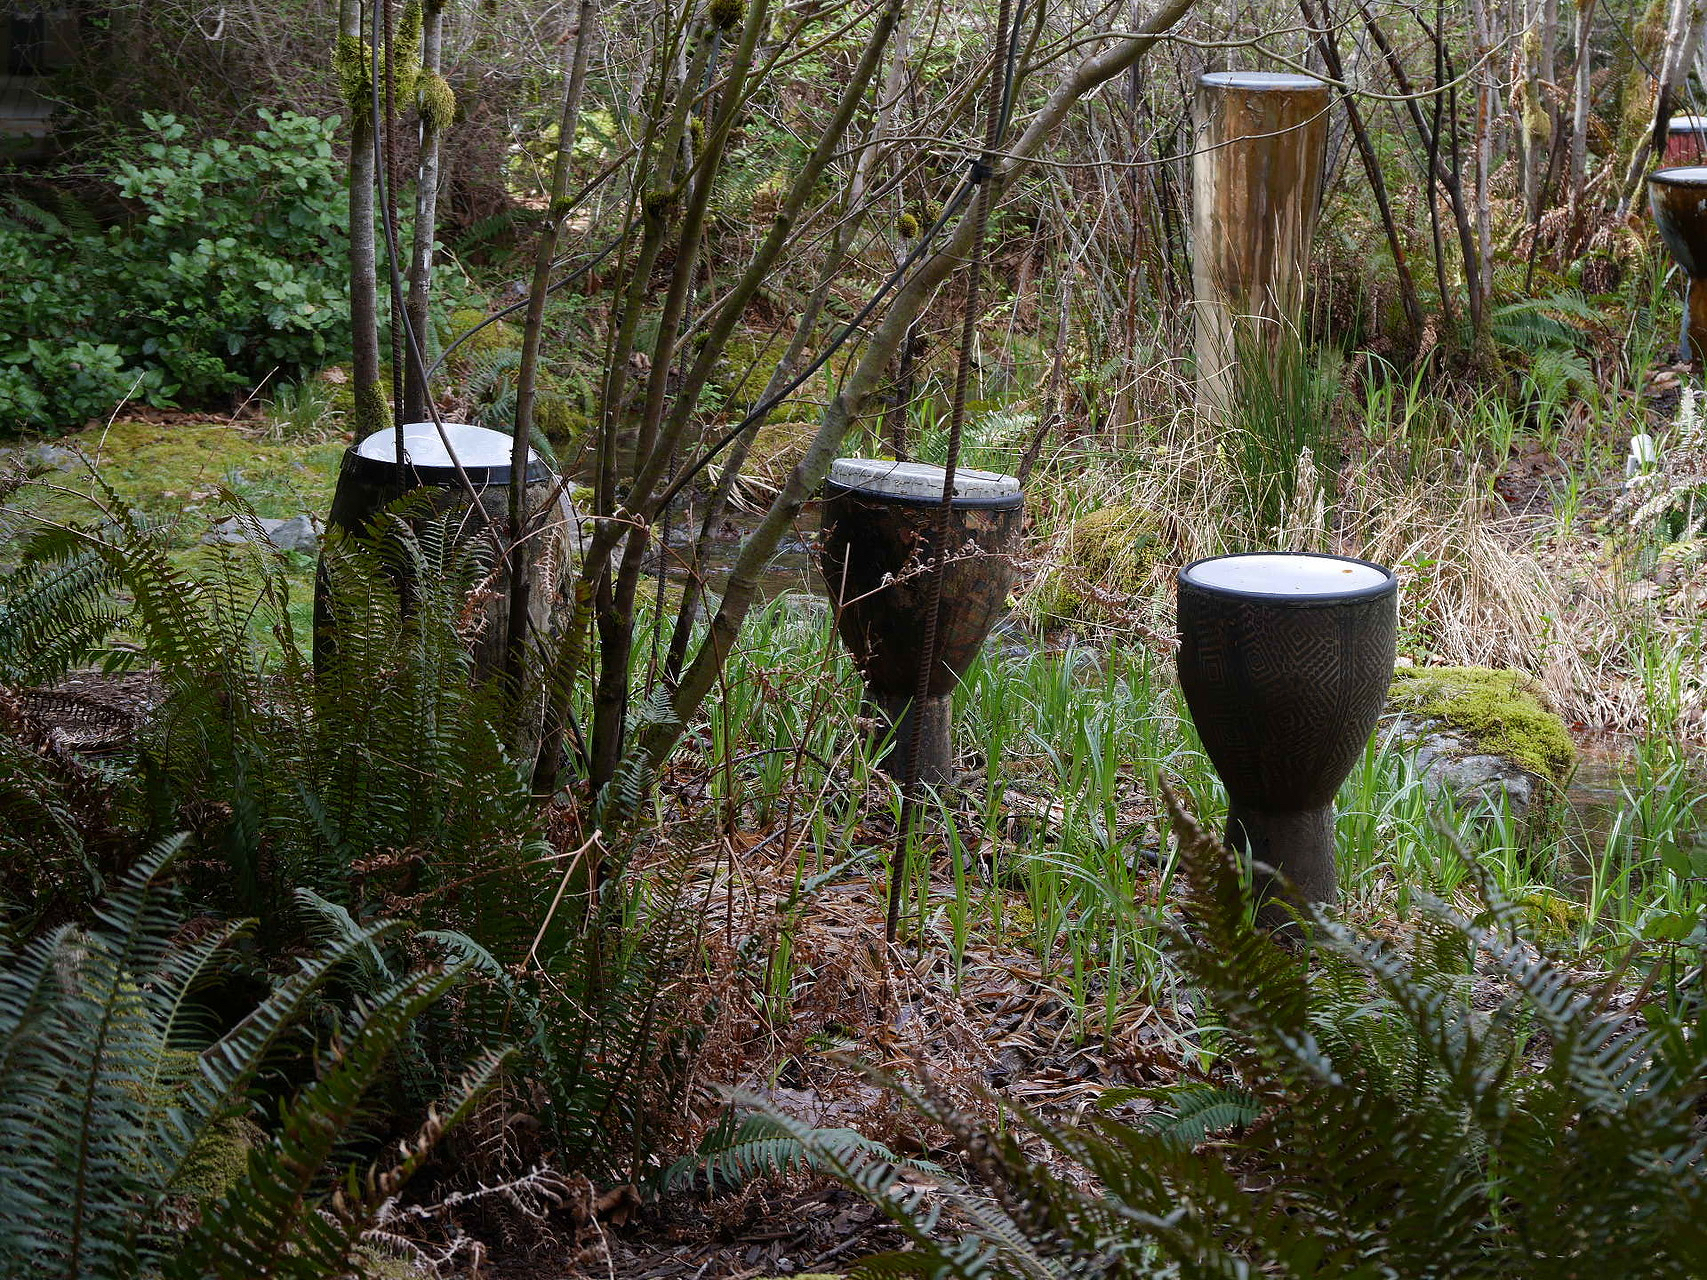 Rain drums at the Cedar River Watershed Center. Photo credit: April Chan